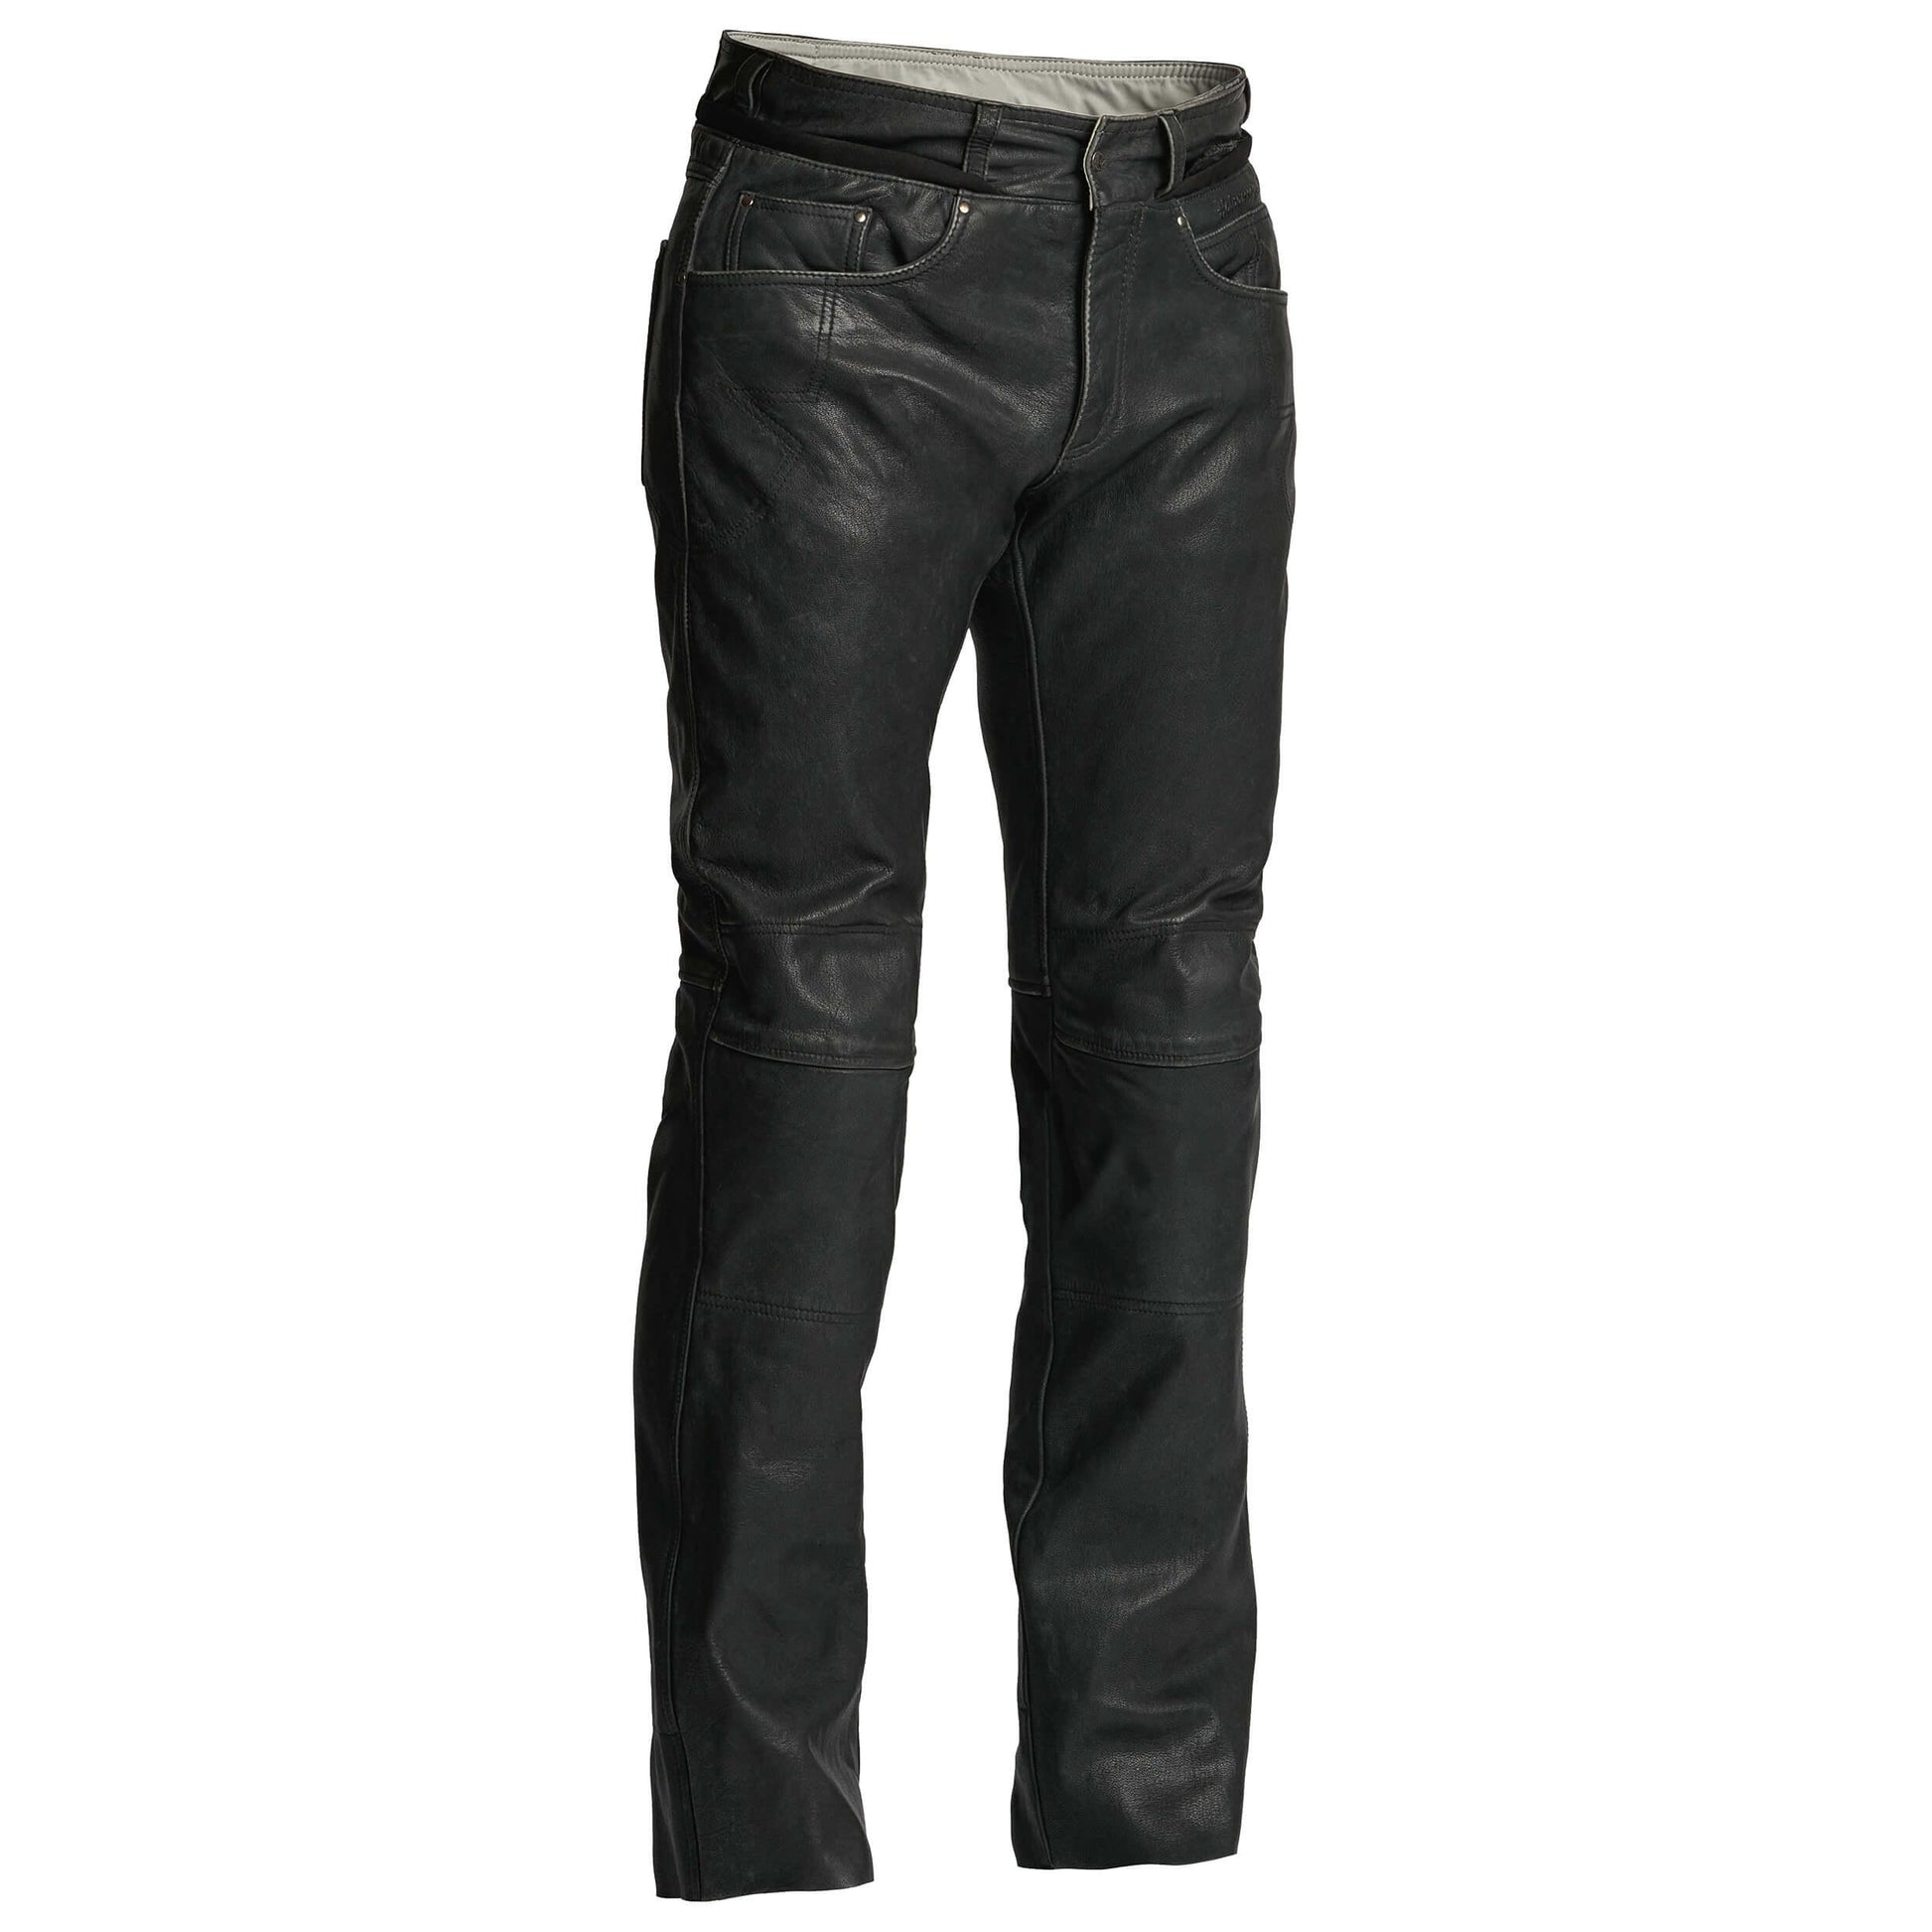 Halvarssons Seth, classic leather, retro jeans style five pocket leather pants